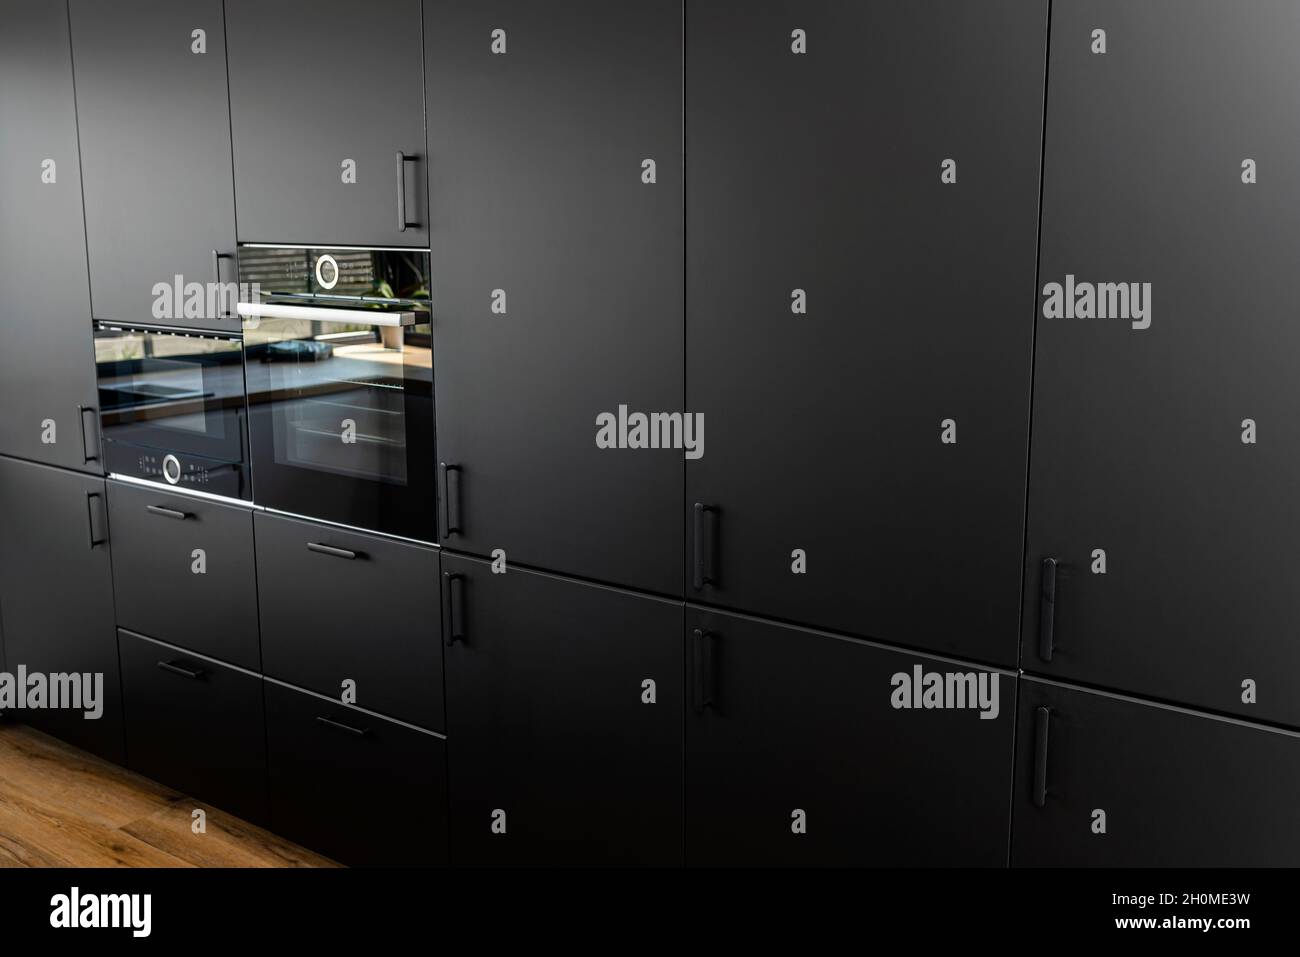 Modern kitchen with black fronts, built in oven and microwave, vinyl panels on the floor. Stock Photo